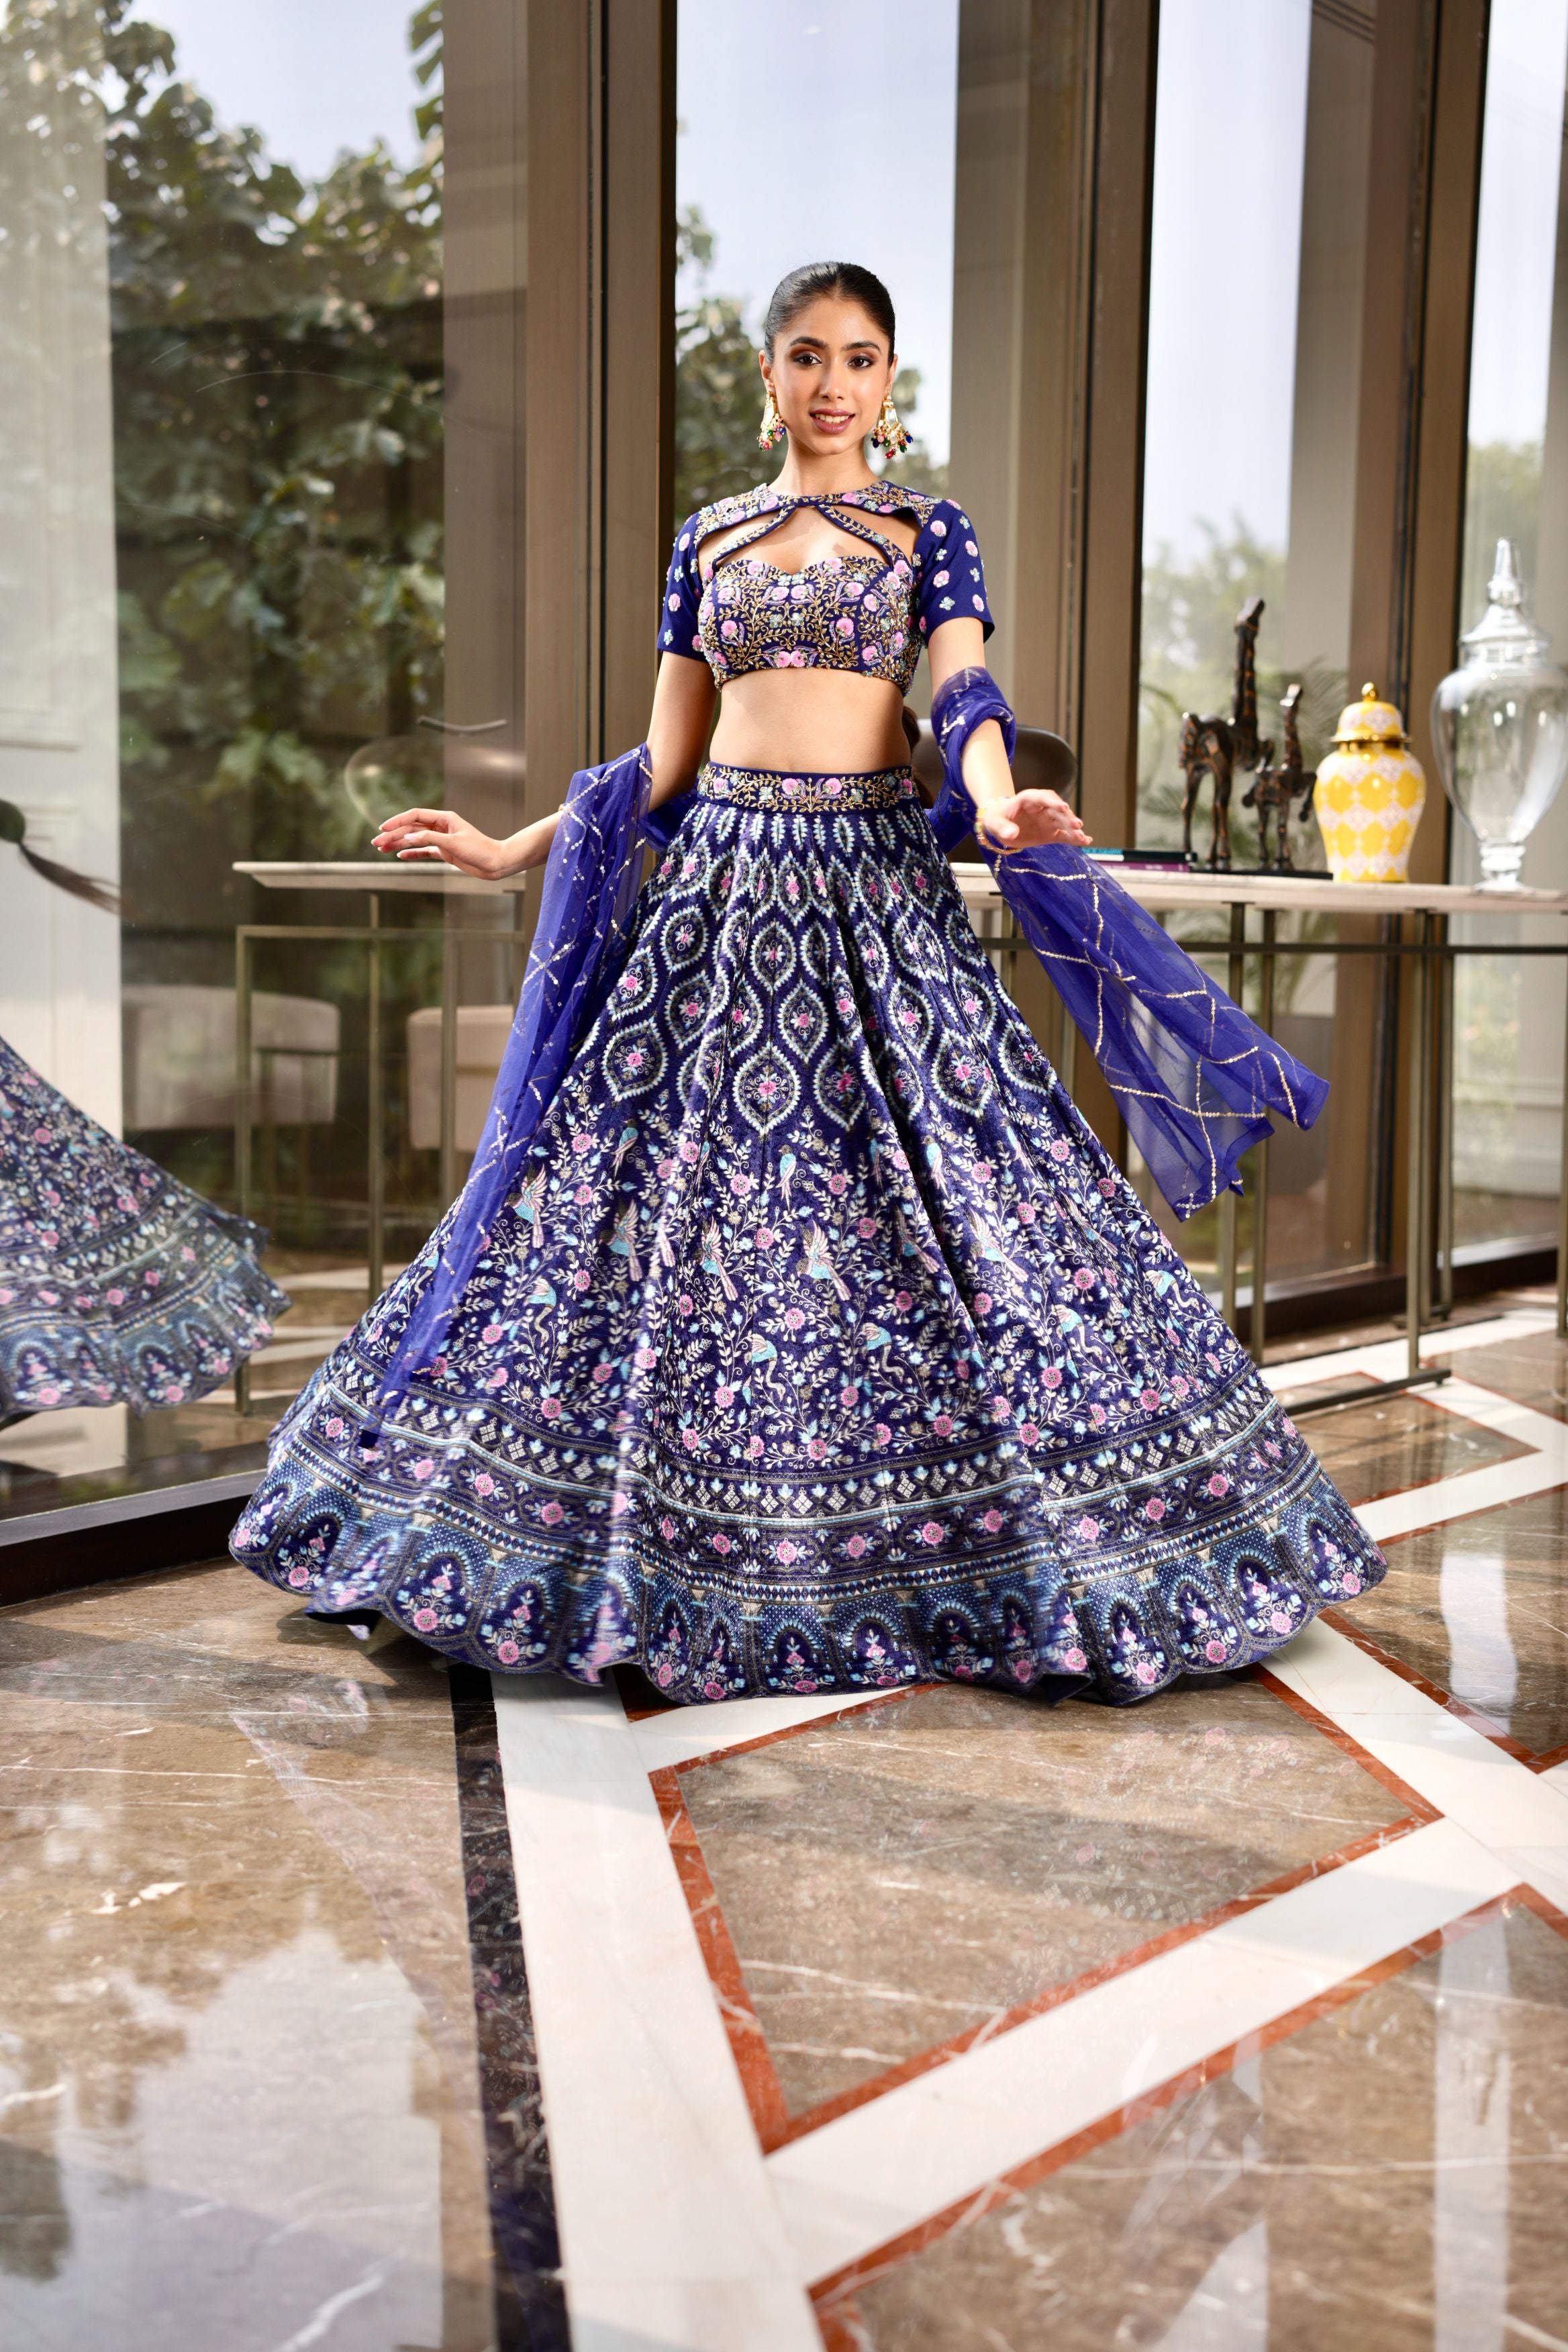 HomeShop18 - #HS18TSO - Complement your beauty only with the best, with Alveera  lehenga sarees. Buy here: http://bit.ly/bea_Sa | Facebook